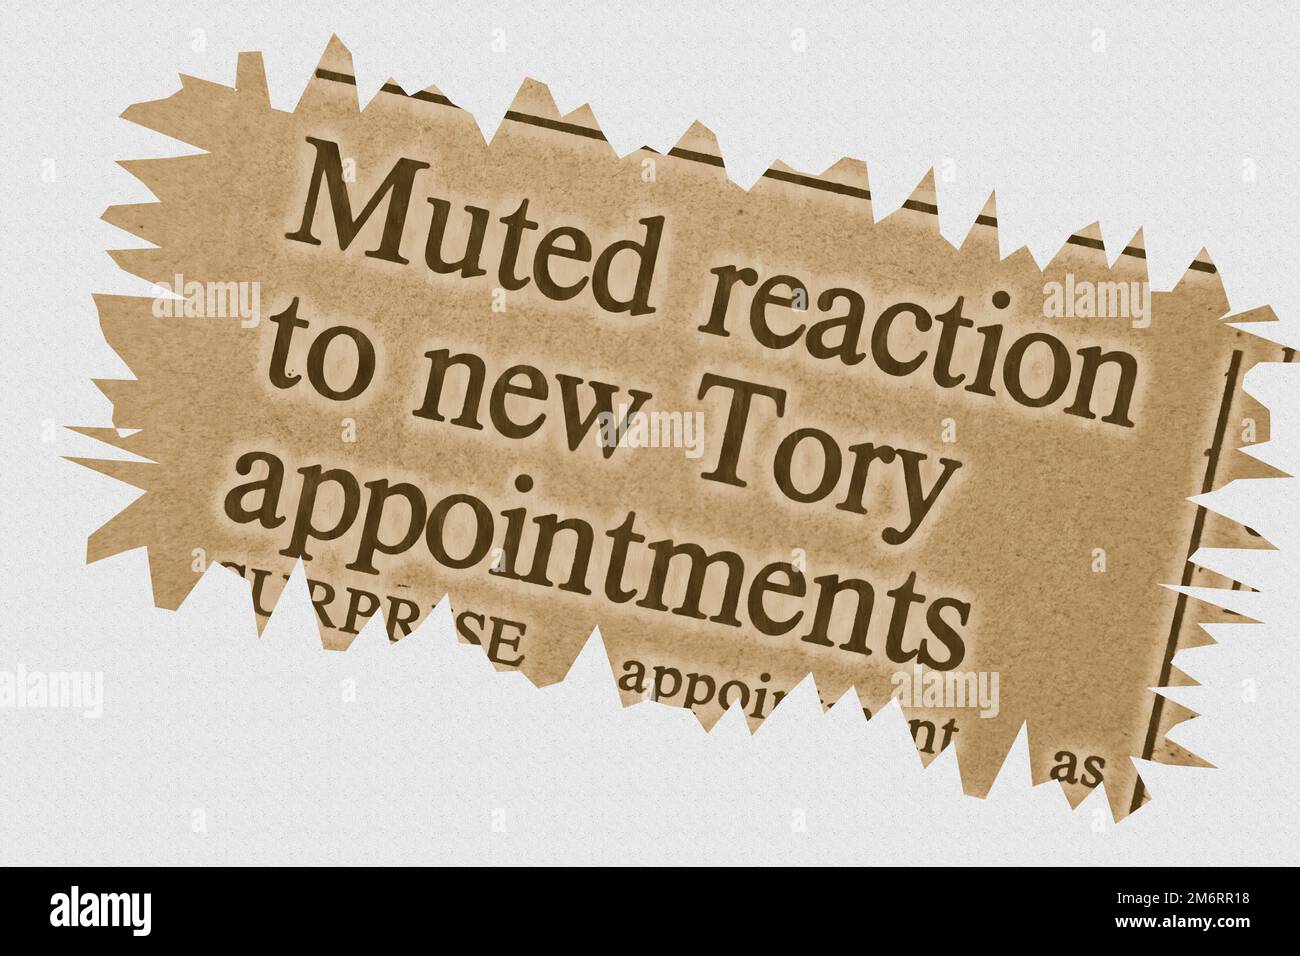 Muted reaction to new Tory appointments - news story from 1975 newspaper headline article title with highlighted overlay Stock Photo